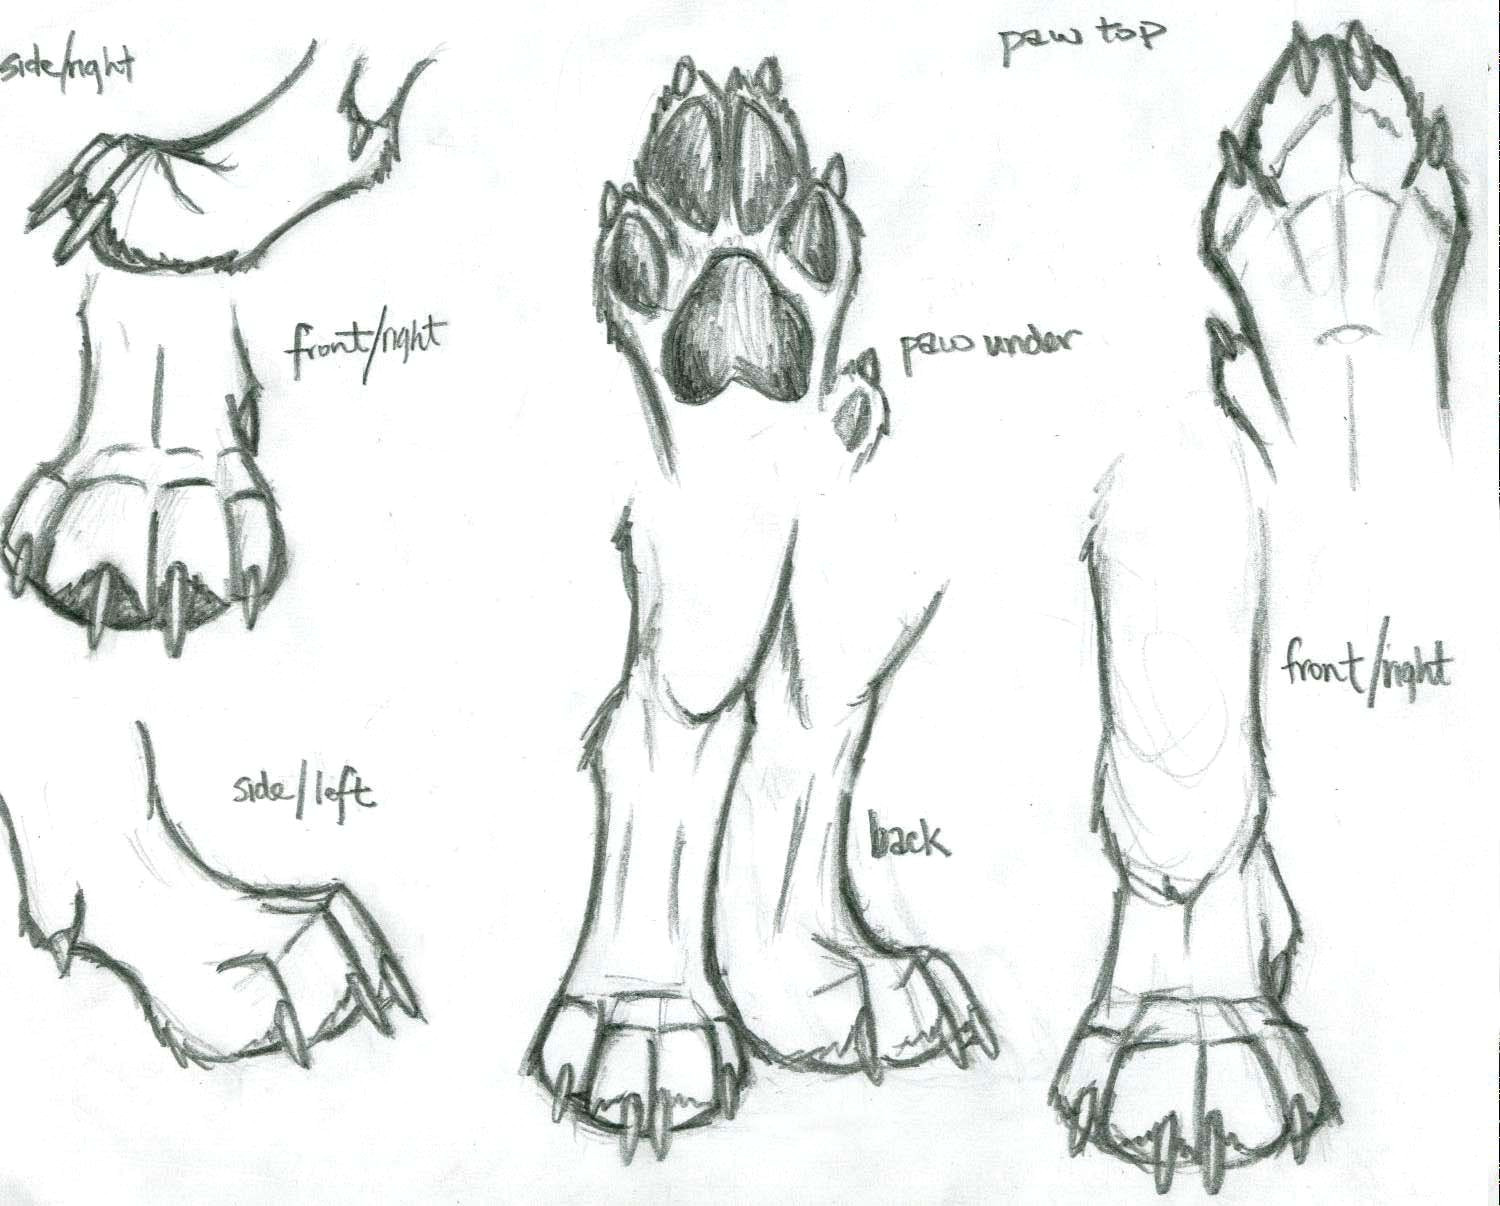 Drawing Dogs Feet Image Result for Anatomical Drawings Dog Paws Interesting